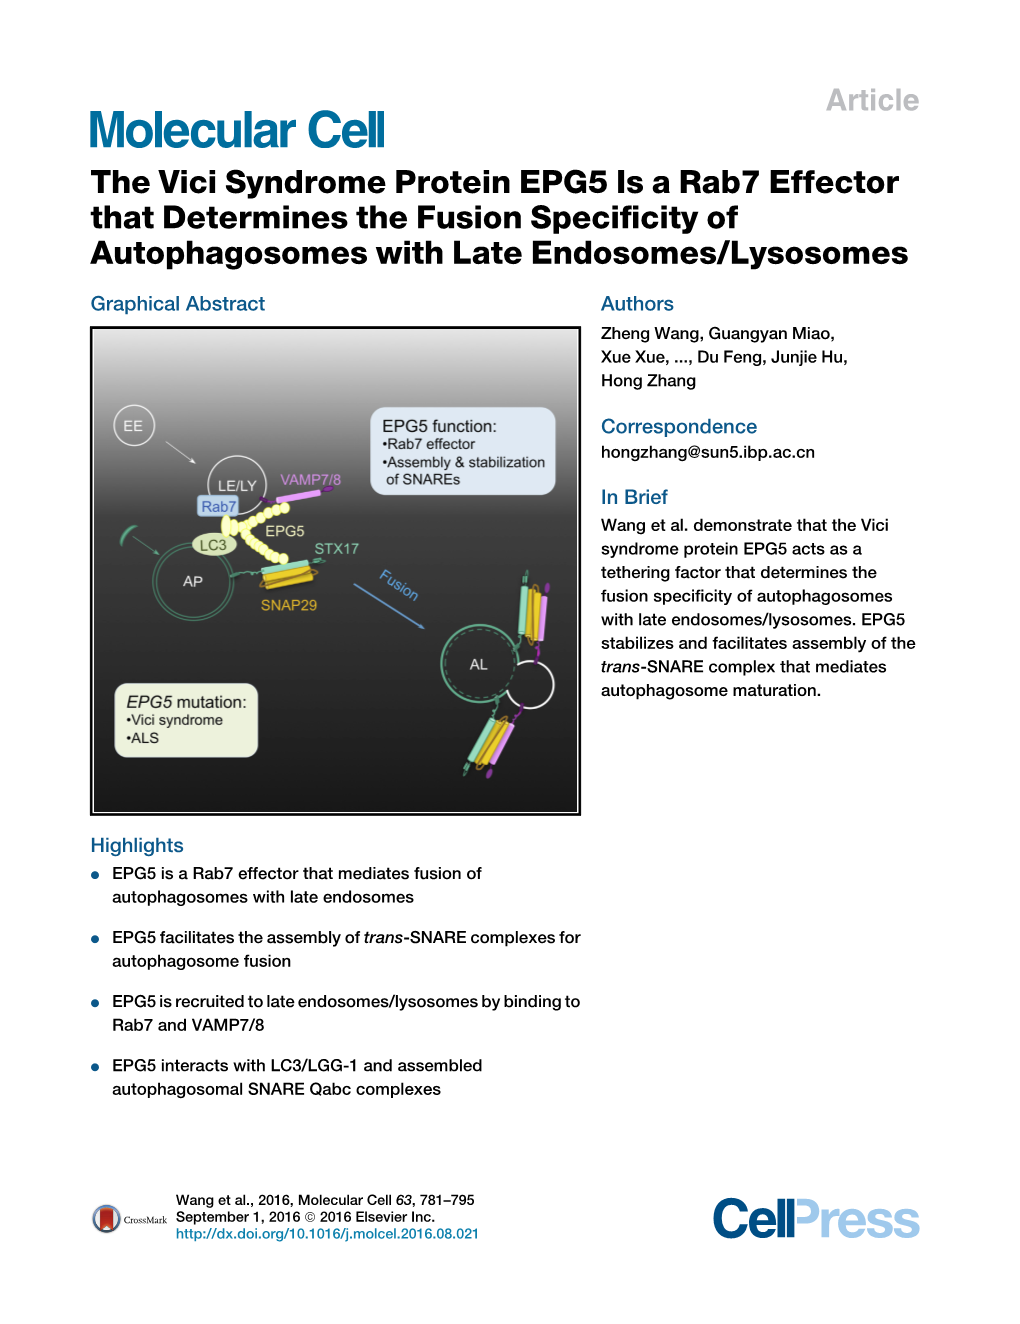 The Vici Syndrome Protein EPG5 Is a Rab7 Effector That Determines the Fusion Speciﬁcity of Autophagosomes with Late Endosomes/Lysosomes